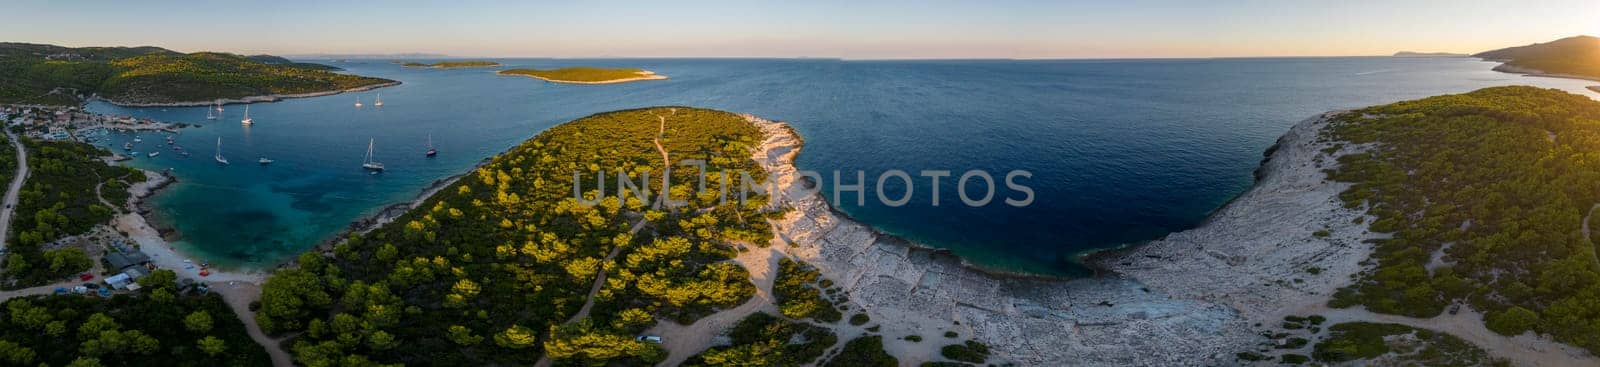 at sunset Vis Island, in Italian Lissa, island of Croatia in the Adriatic Sea. It is the outermost major island of the Dalmatian archipelago panoramic aerial view landscape